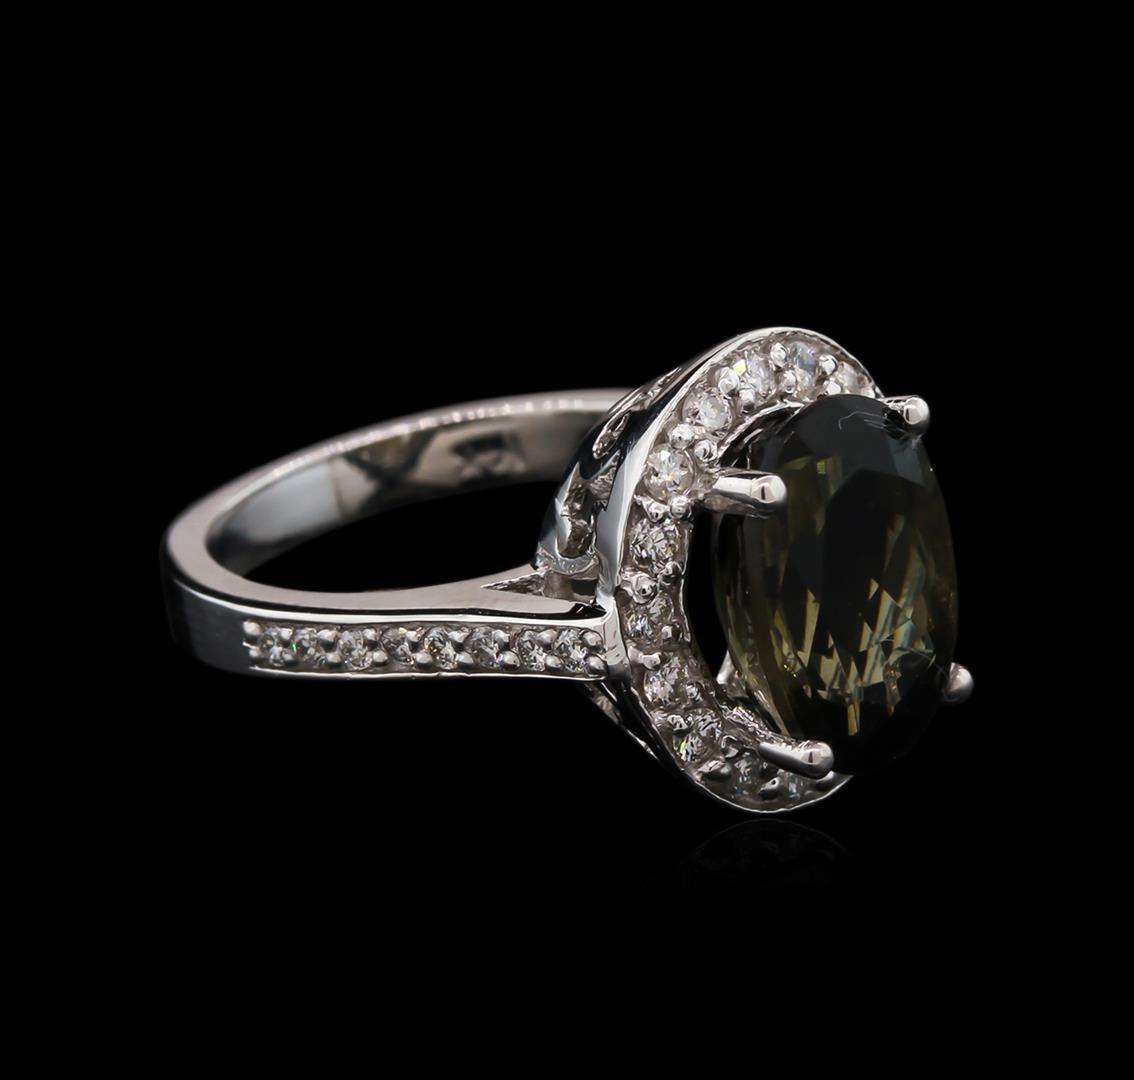 4.35 ctw Green Tourmaline and Diamond Ring - 14KT White Gold